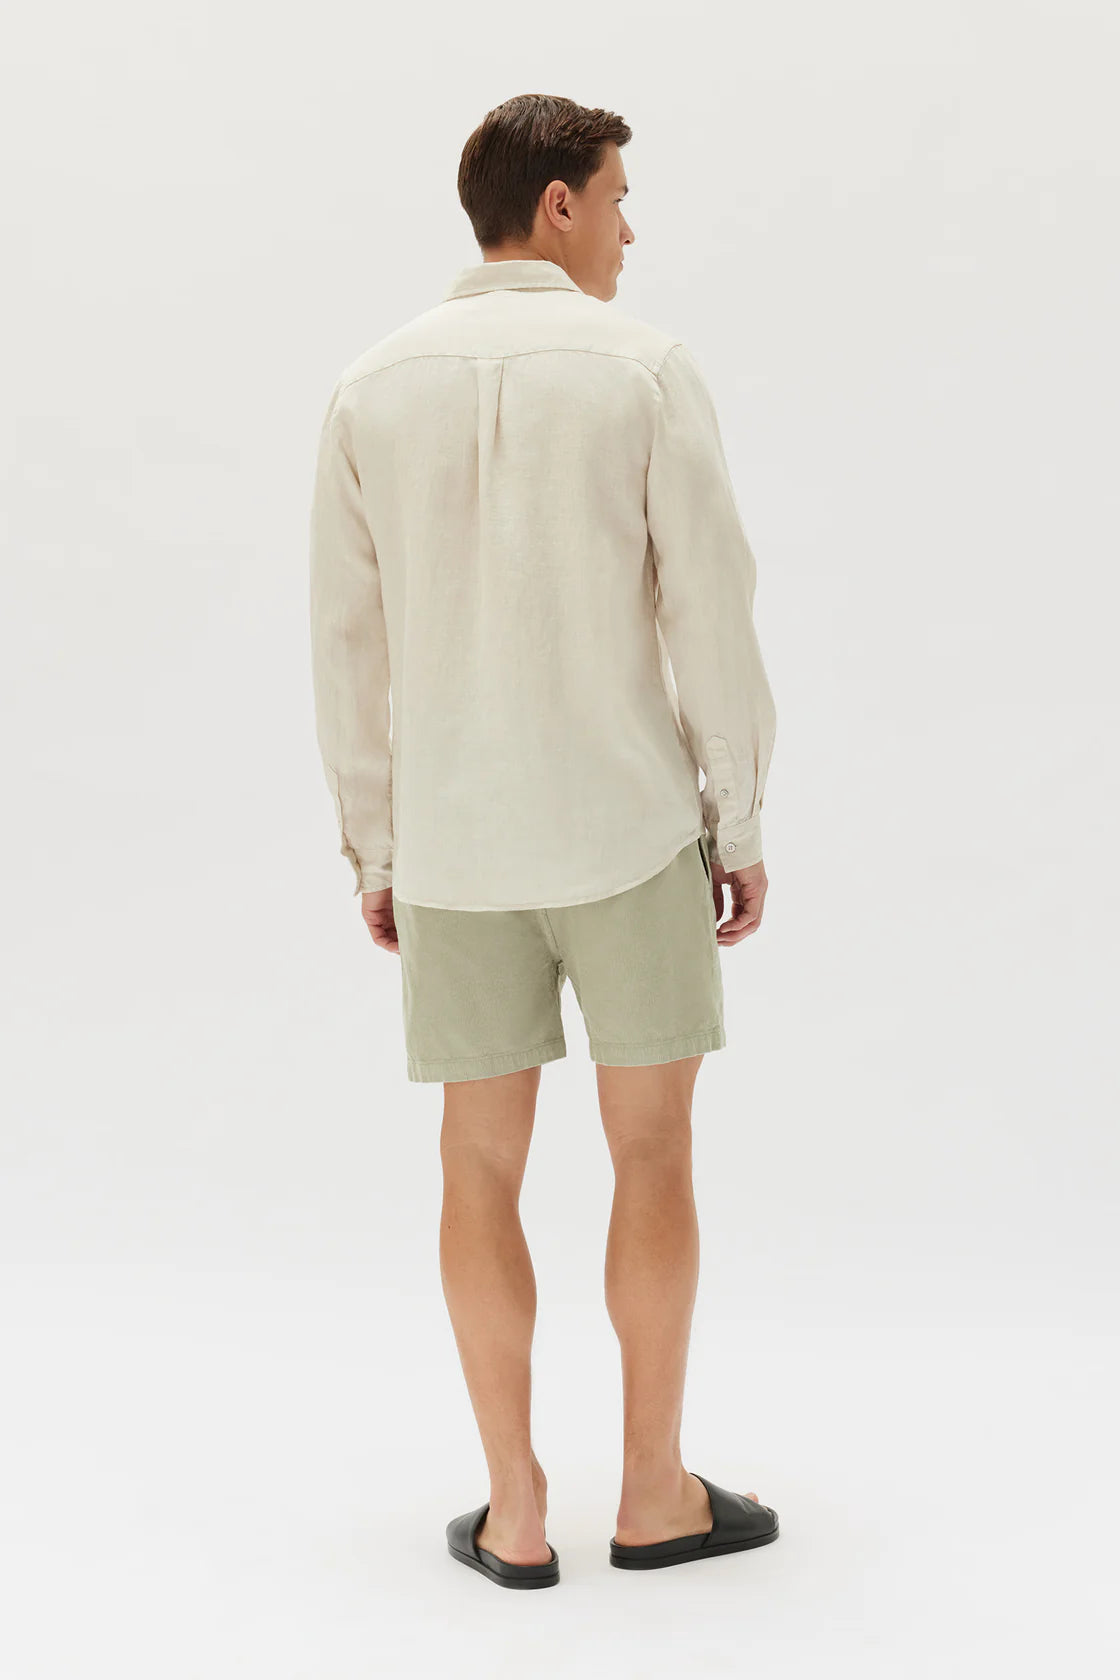 ASSEMBLY LABEL // Casual Long Sleeve Shirt STONE